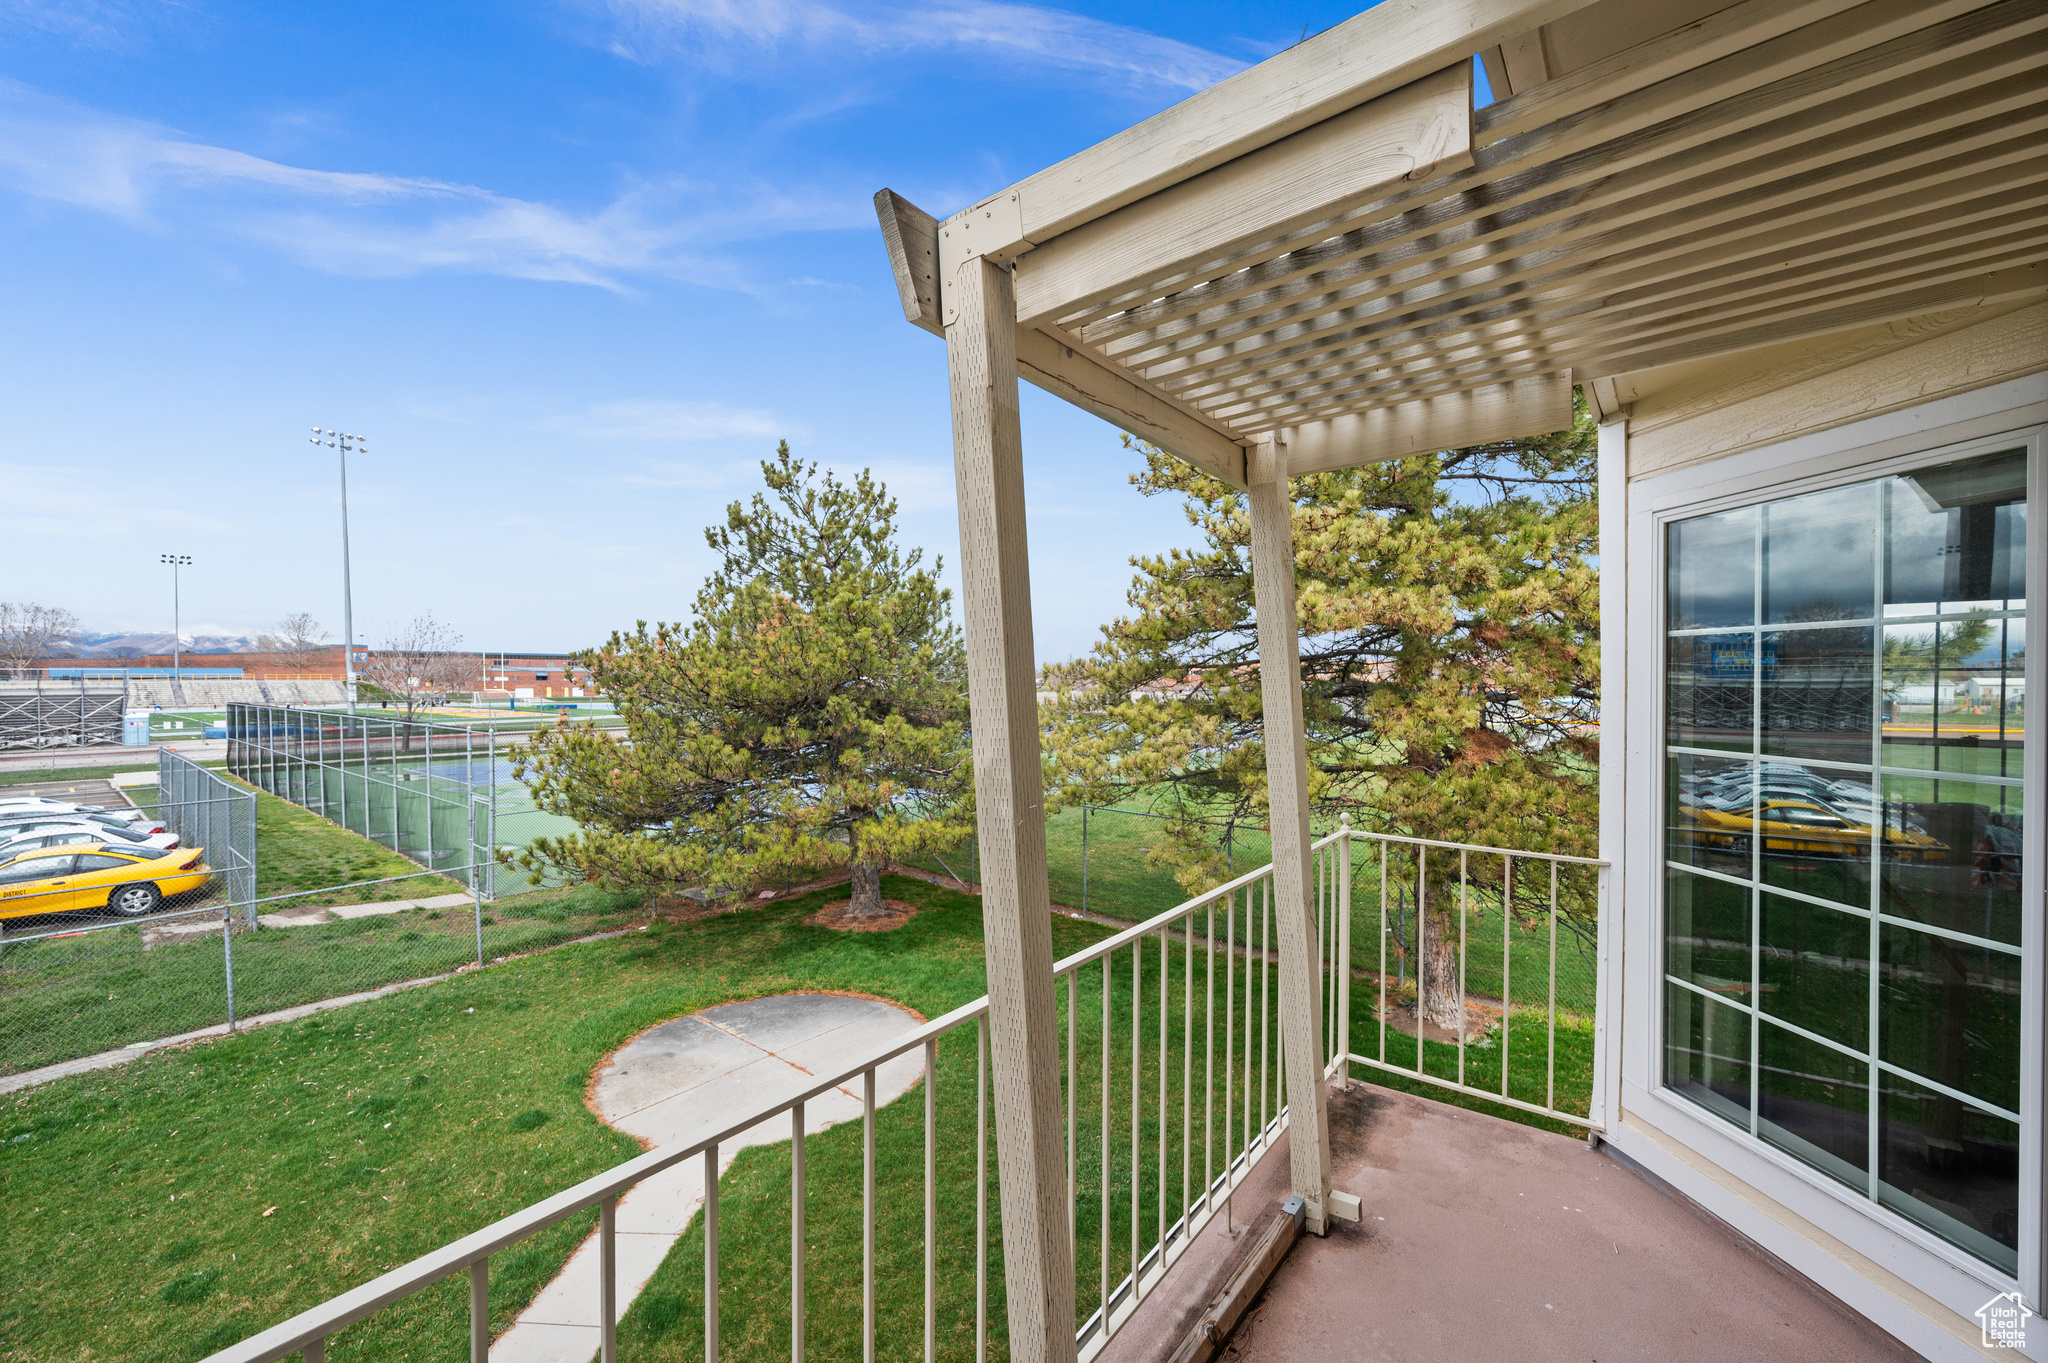 1444 W BEACON HILL E #174, Taylorsville, Utah 84123, 1 Bedroom Bedrooms, 8 Rooms Rooms,1 BathroomBathrooms,Residential,For sale,BEACON HILL,1996316